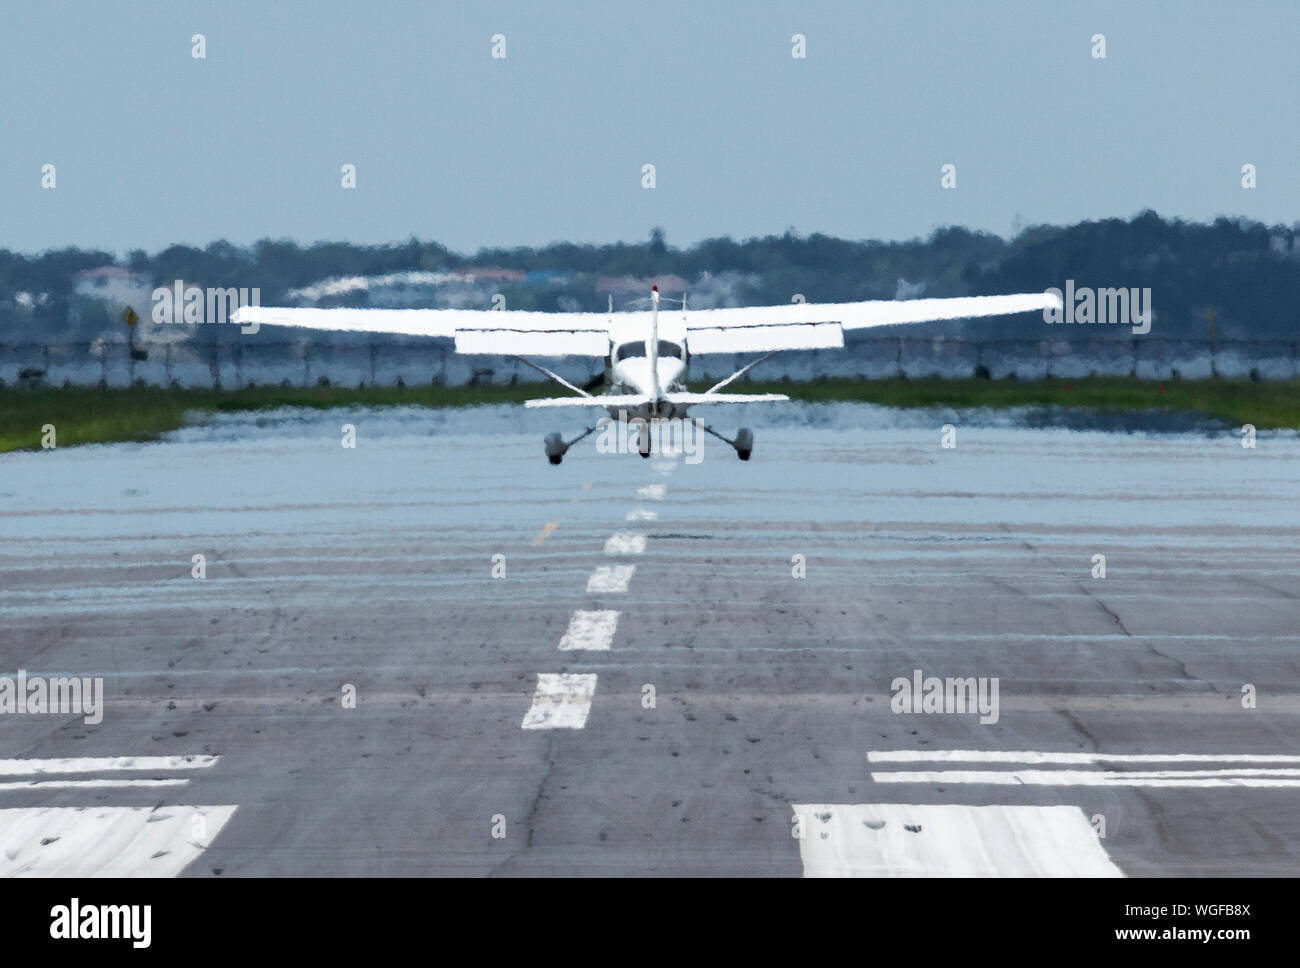 Small white Cessna plane taking off in the visible heat of Southern Florida. Stock Photo